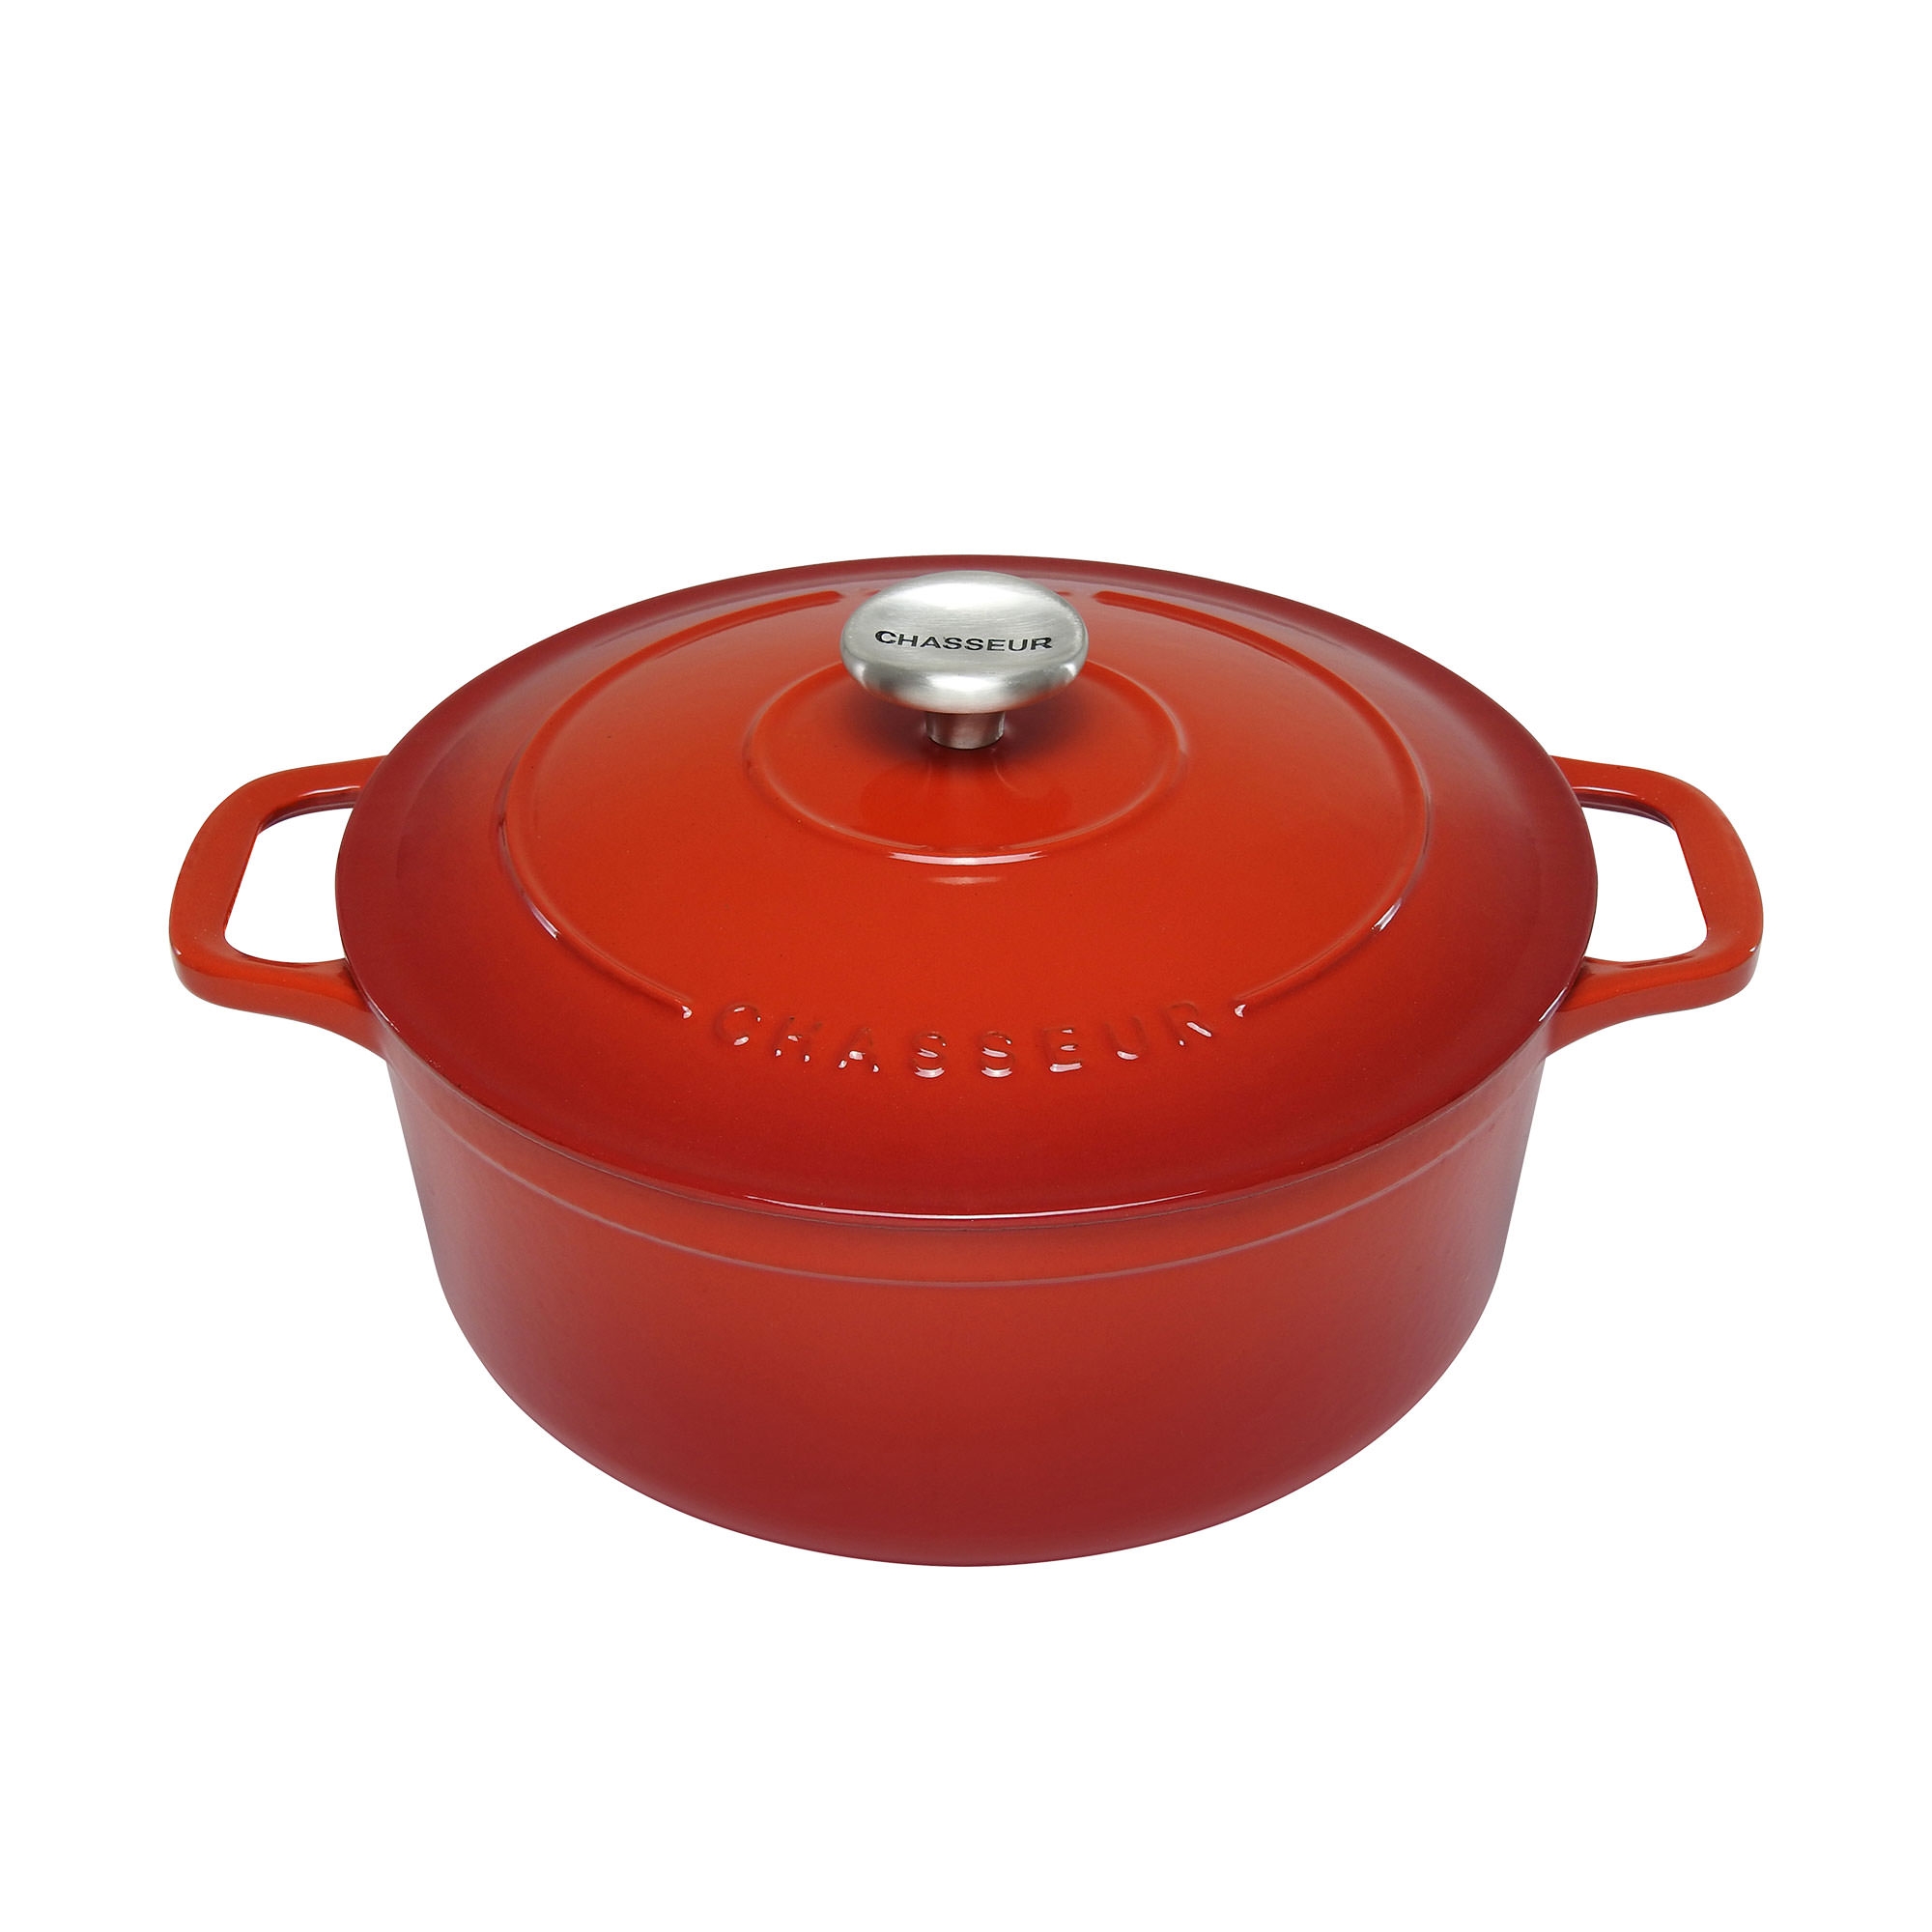 Chasseur Round French Oven 28cm - 6.3L Inferno Red Image 1